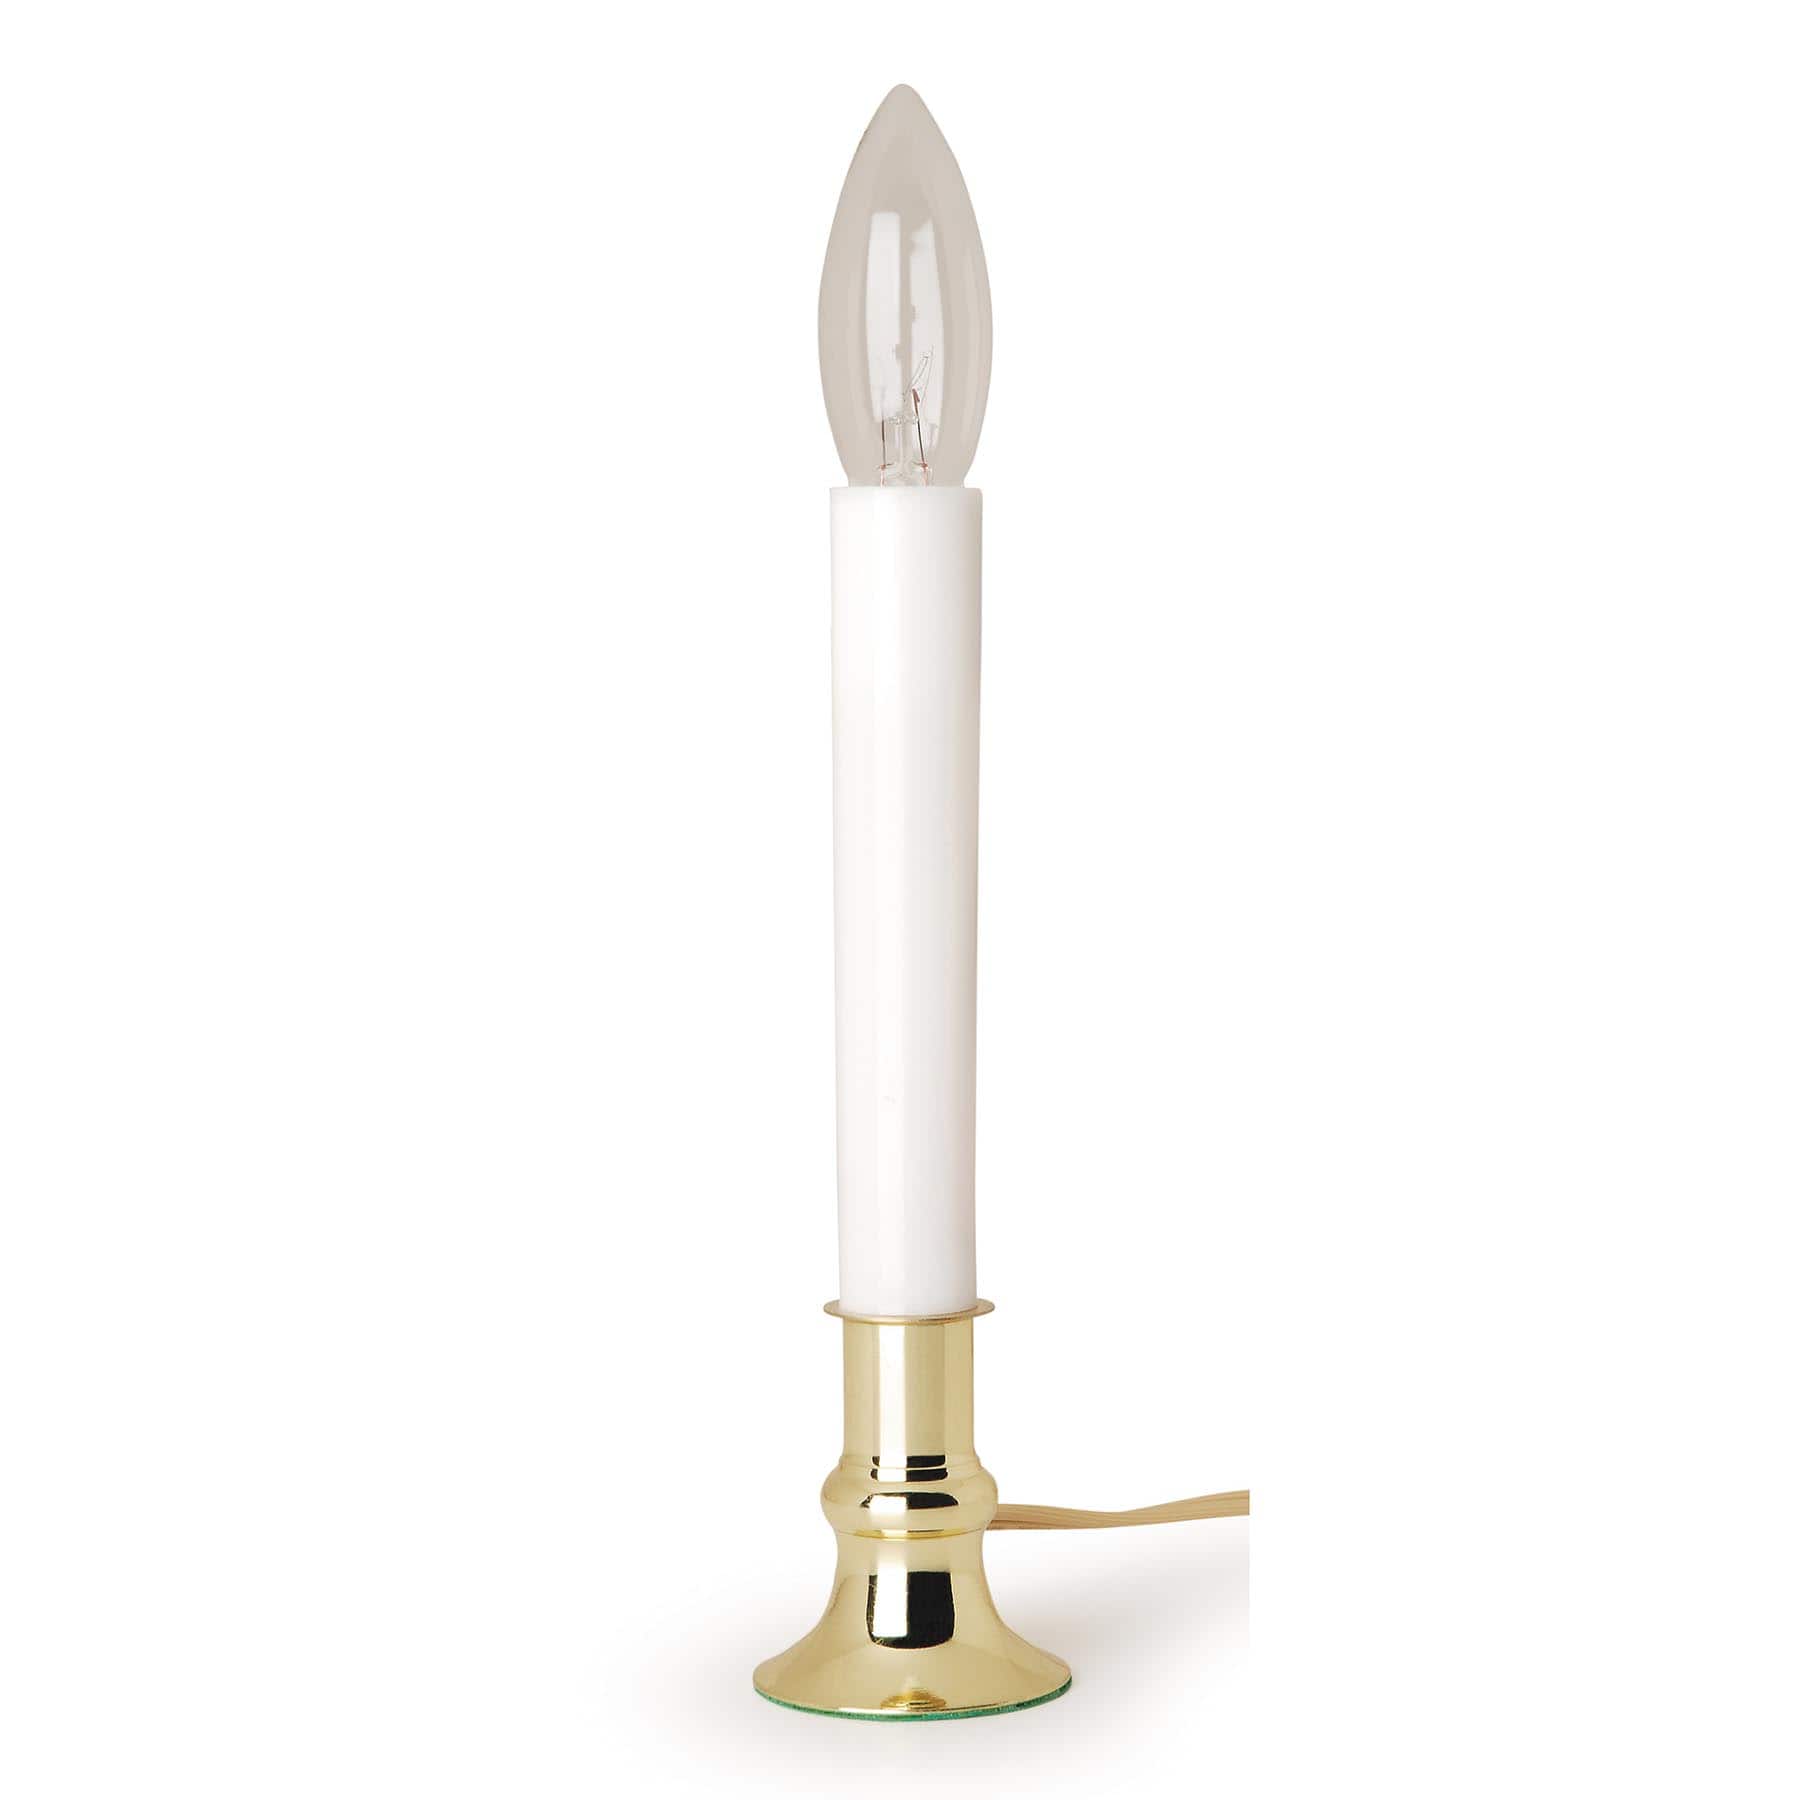 6 Brass Plated Electric Window Candle Lamp Light Automatic On Off Dusk Dawn Base 